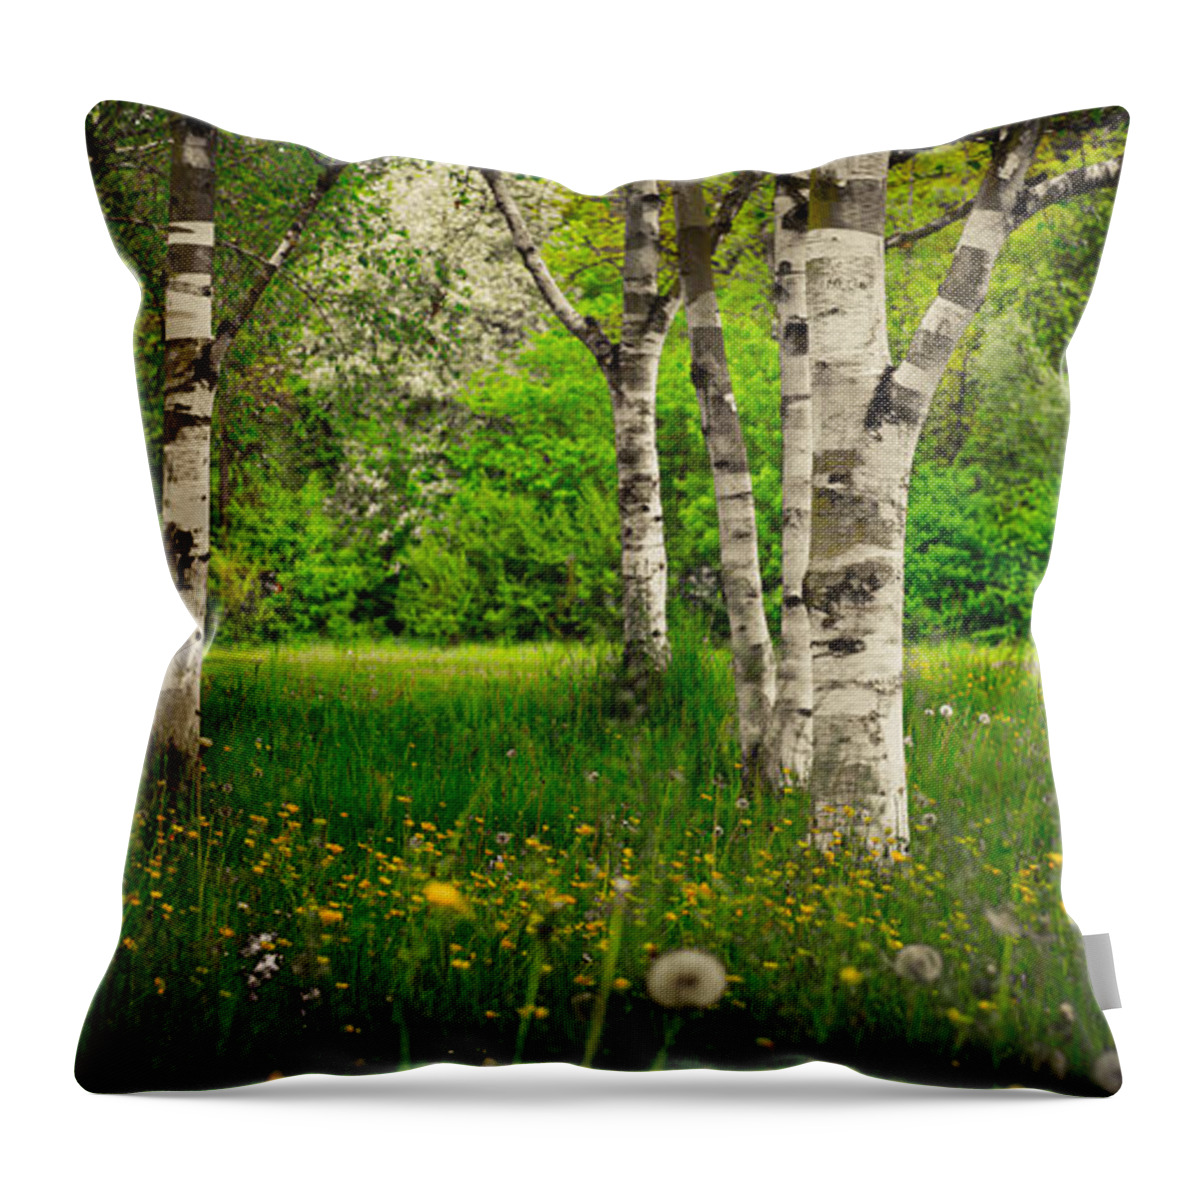 Birch Throw Pillow featuring the photograph Birches #1 by Hannes Cmarits